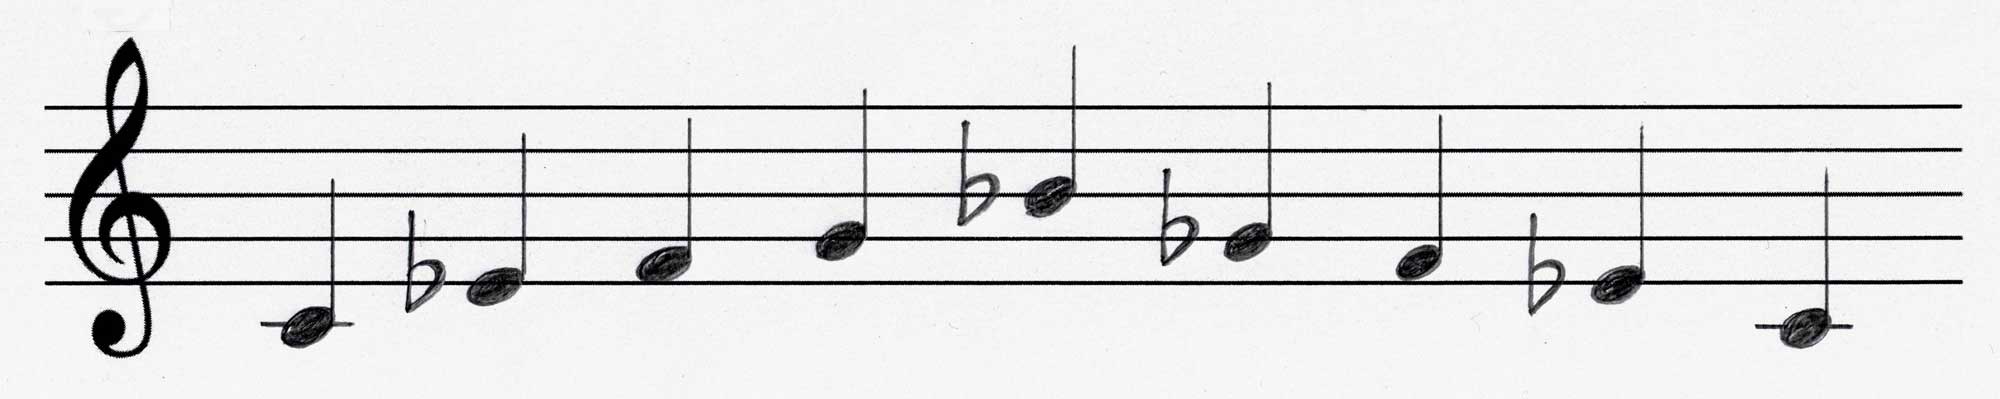 Blues scale for "improvisation while singing"